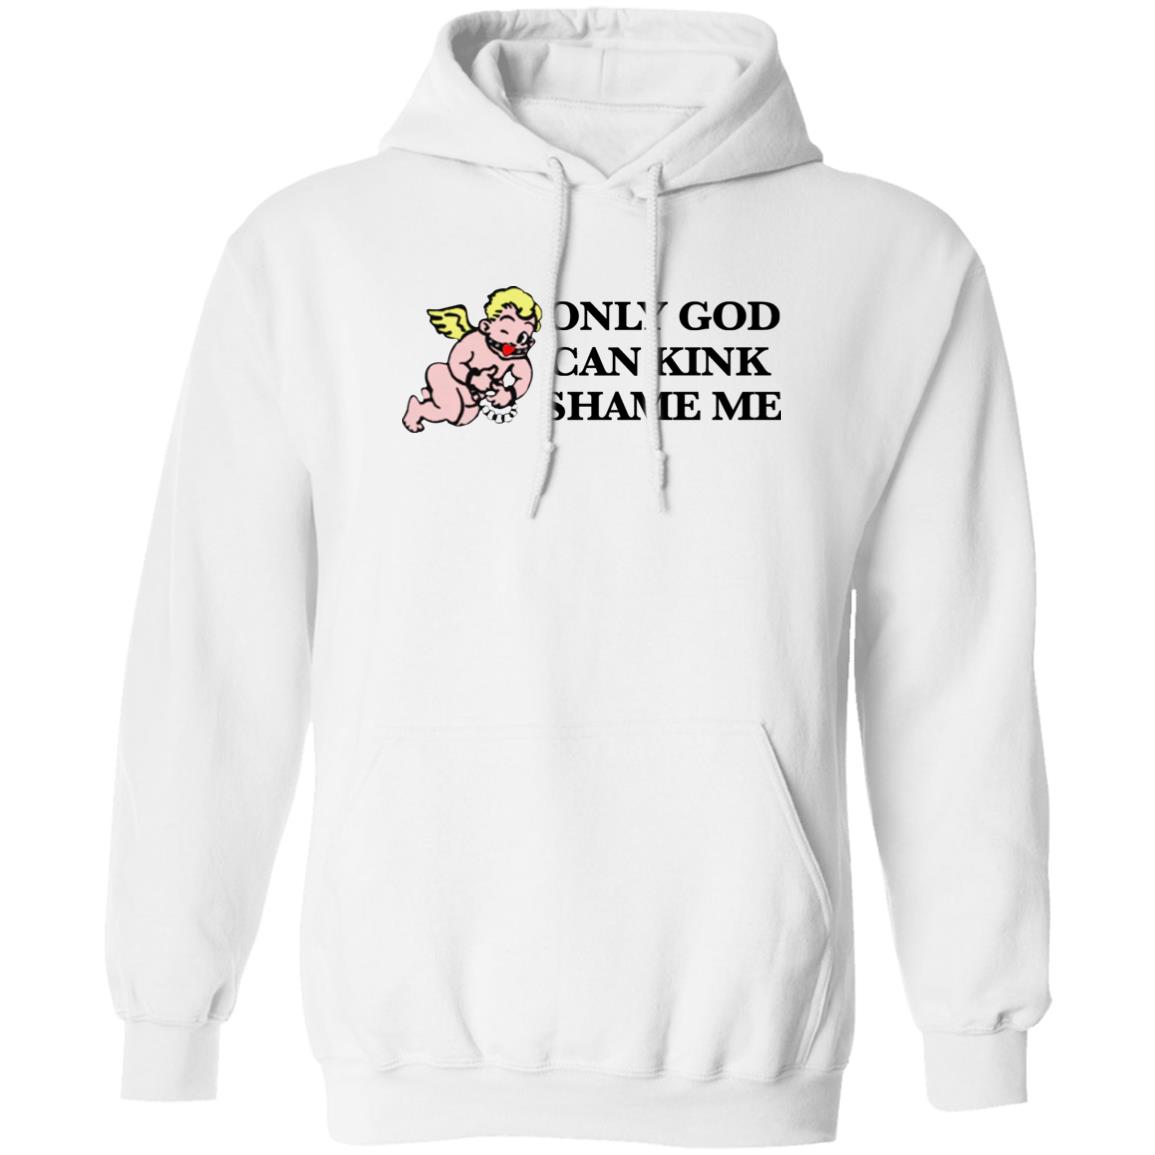 Only God Can Kink Shame Me Shirt Panetory – Graphic Design Apparel &Amp; Accessories Online